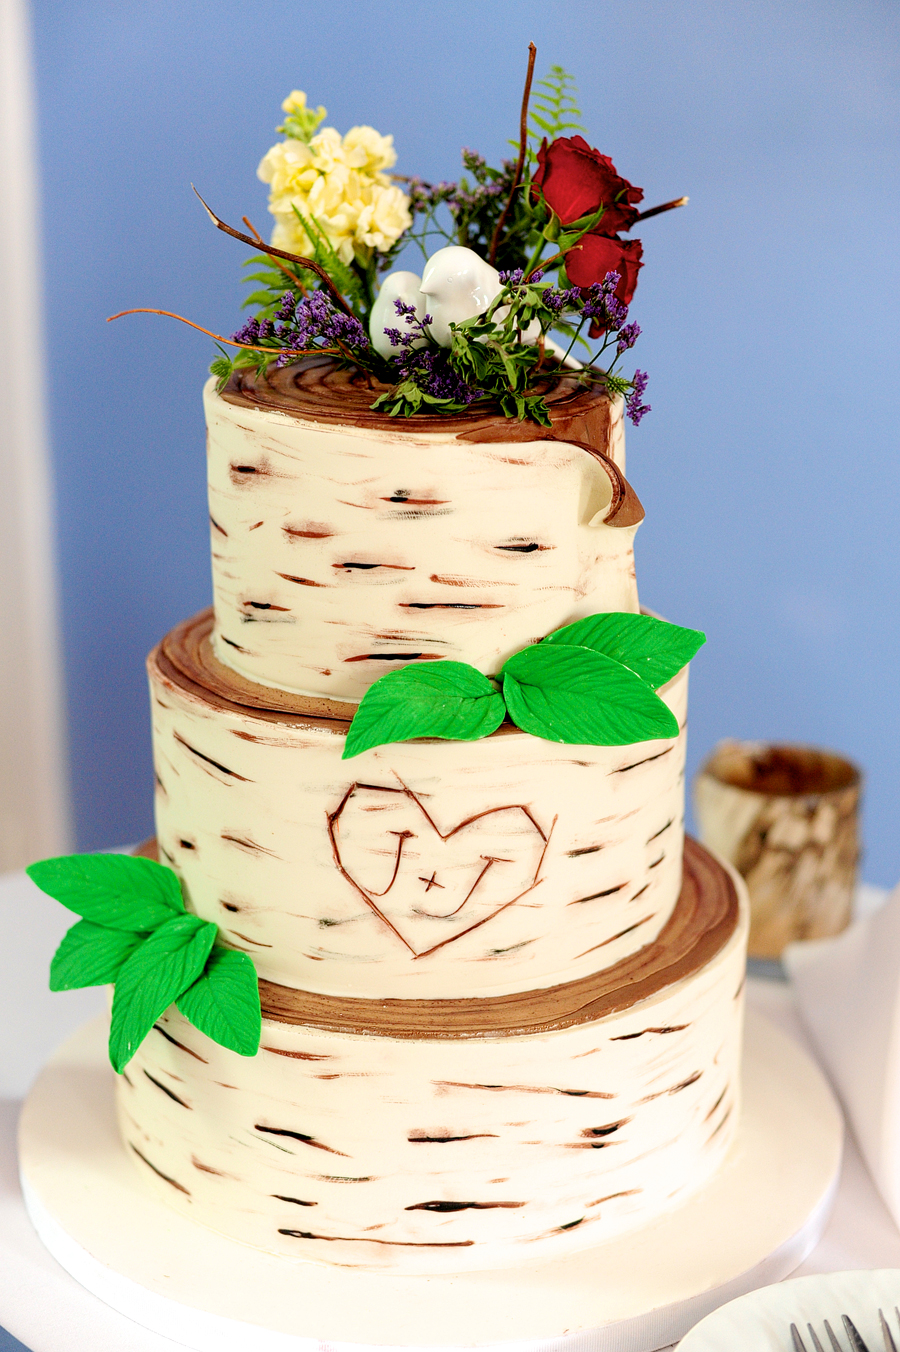 carved birch tree cake with bird nest cake toppers